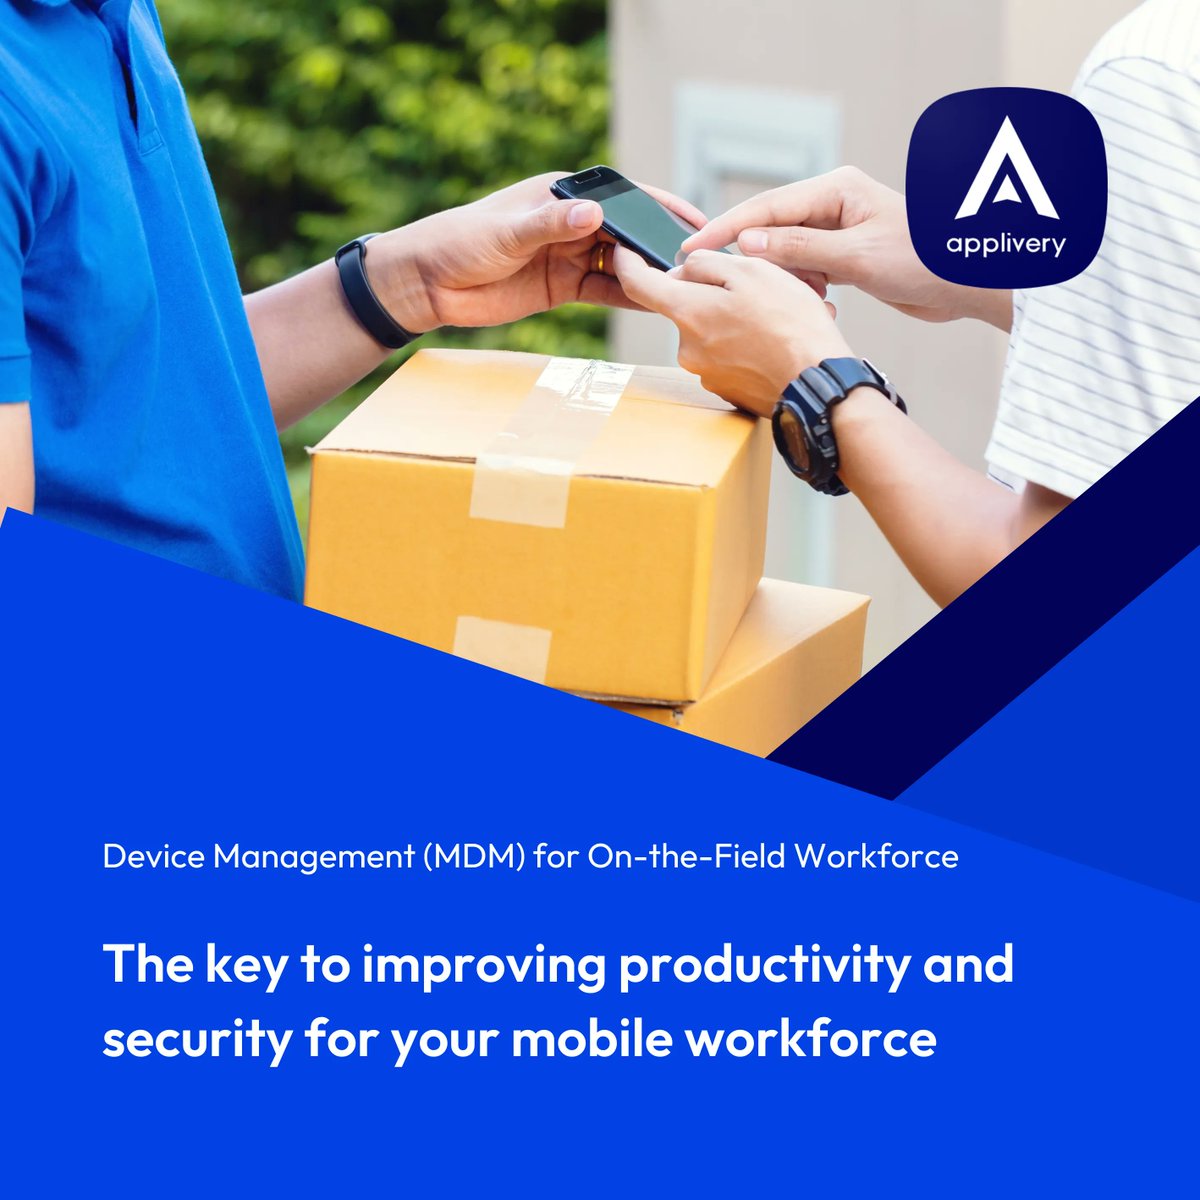 Unlocking the secrets to supercharging your team's productivity and security on-the-go! 🔑🔒 Head to our latest blog post to discover the key to boosting mobile workforce 🚀

👉 buff.ly/3Ll37ke 

#MobileWorkforce #ProductivityTips #ProductivityHacks #SecureRemoteAccess